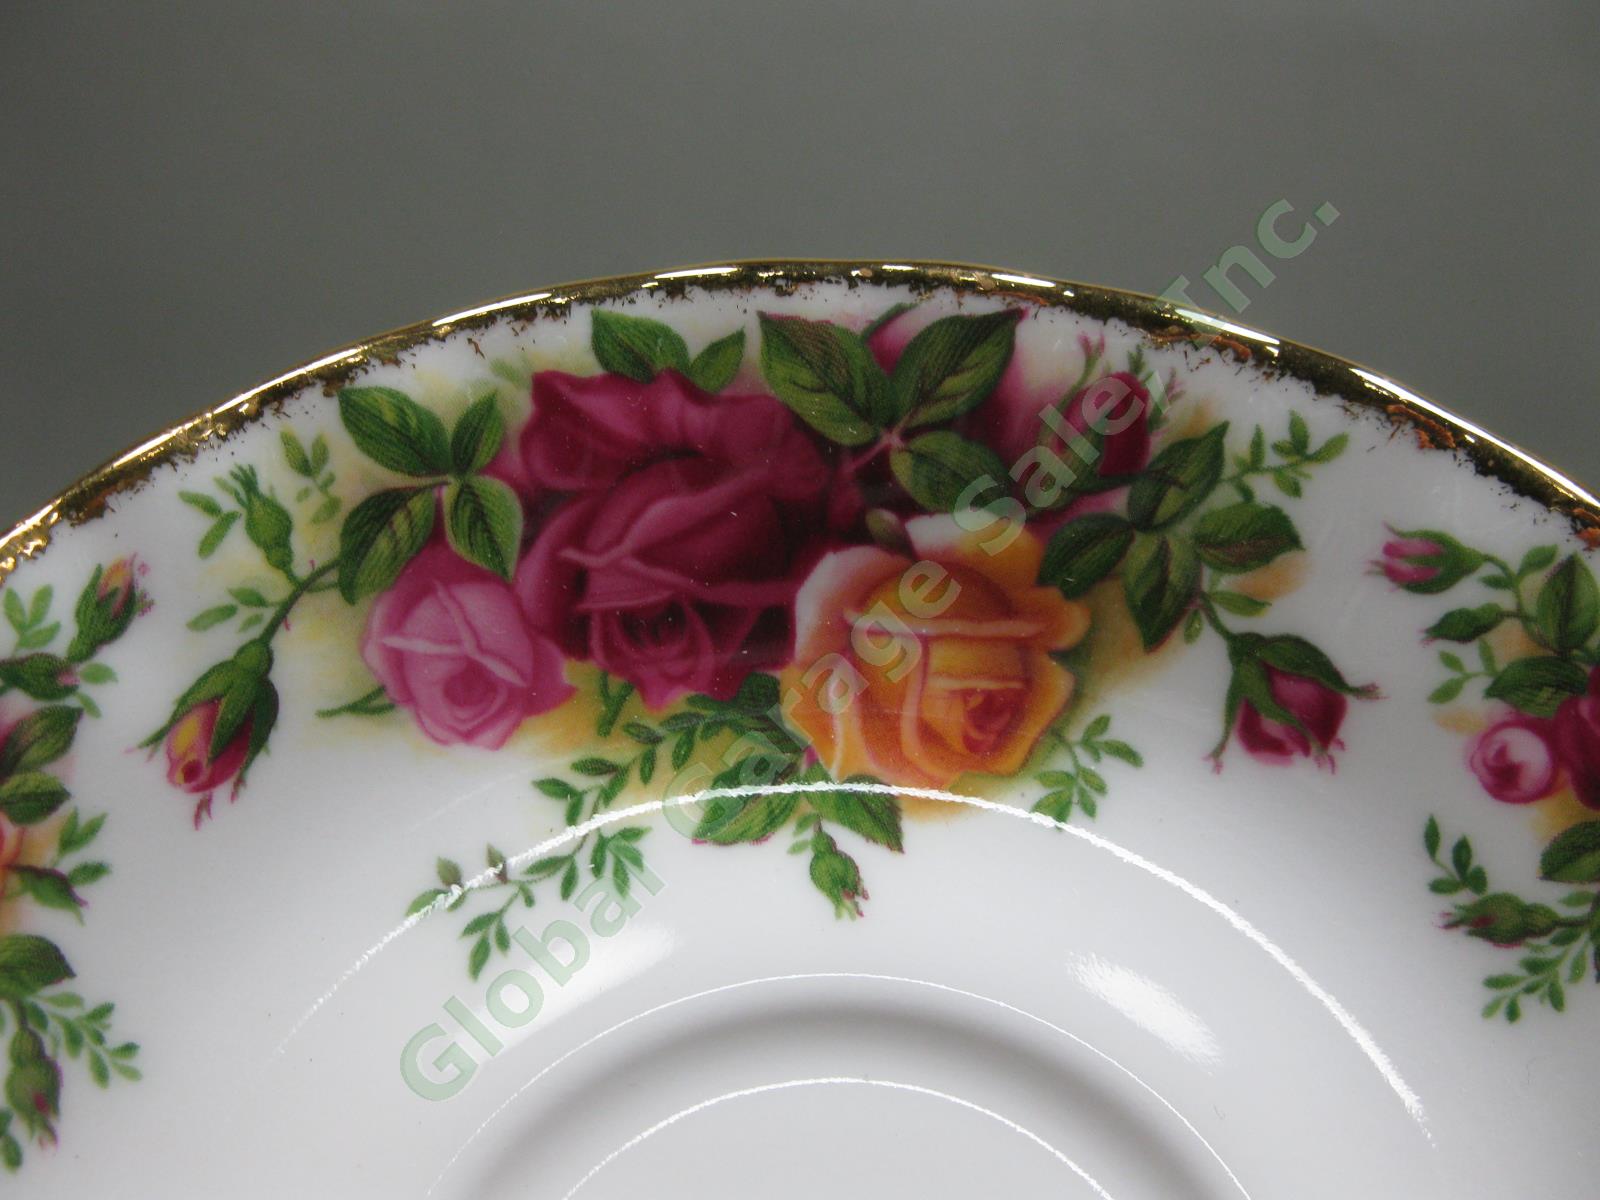 8 Royal Albert Old Country Roses Footed Tea Cup/Saucer Gold Trim Bone China Set 8